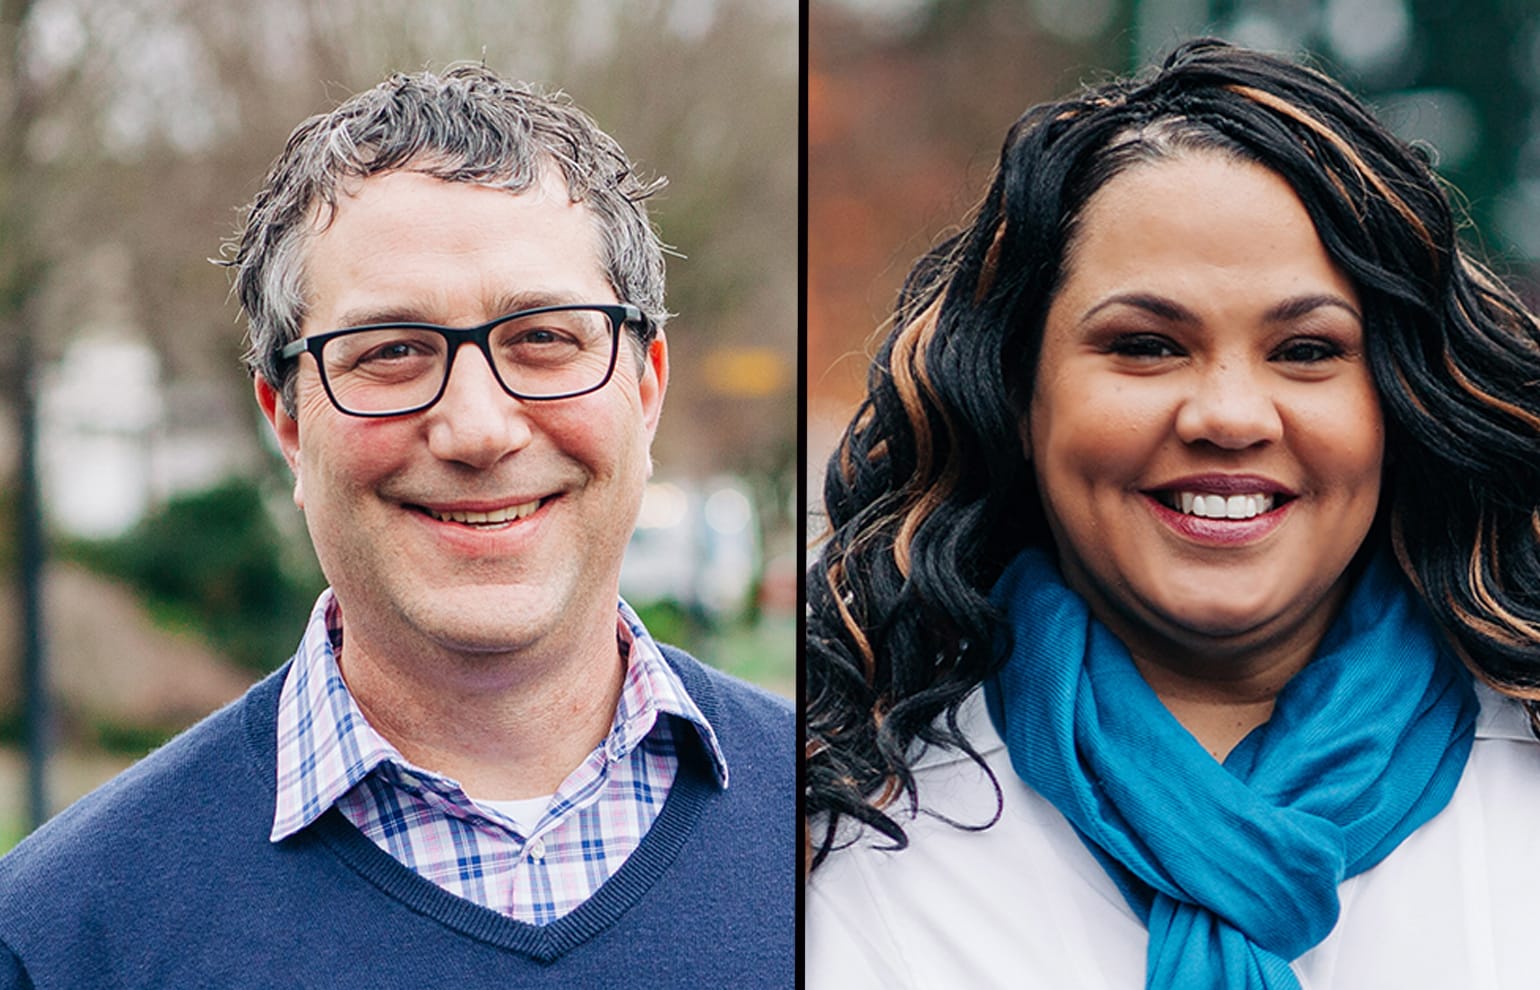 Democrat Daniel Smith, left, says he will run this year for the seat currently held by Sen. Lynda Wilson, R-Vancouver, in the 17th Legislative District. Democrat Tanisha Harris, right, says she will run this year for the seat currently held by Rep. Vicki Kraft, R-Vancouver, in the 17th Legislative District.